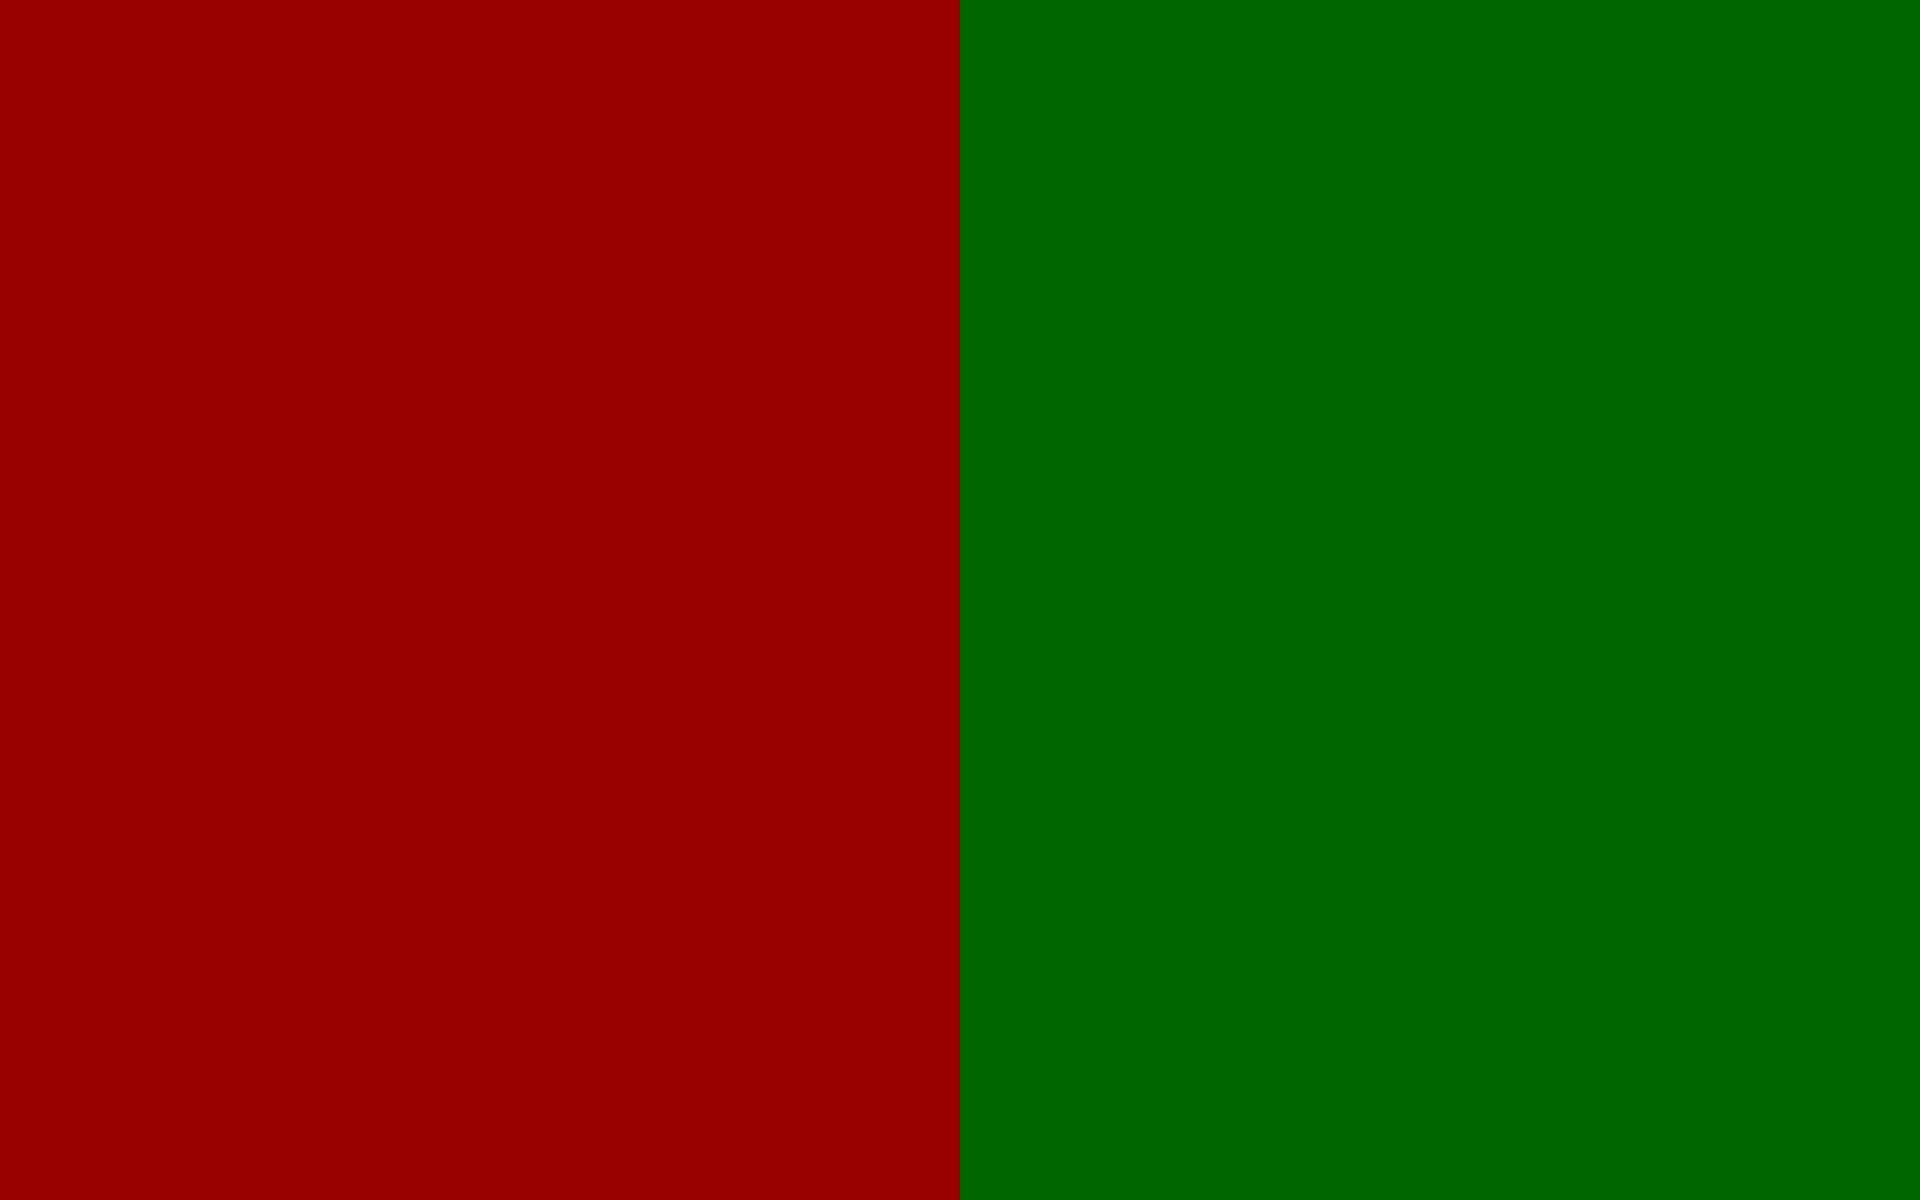 1920x1200-ou-crimson-red-pakistan-green-two-color-background.jpg